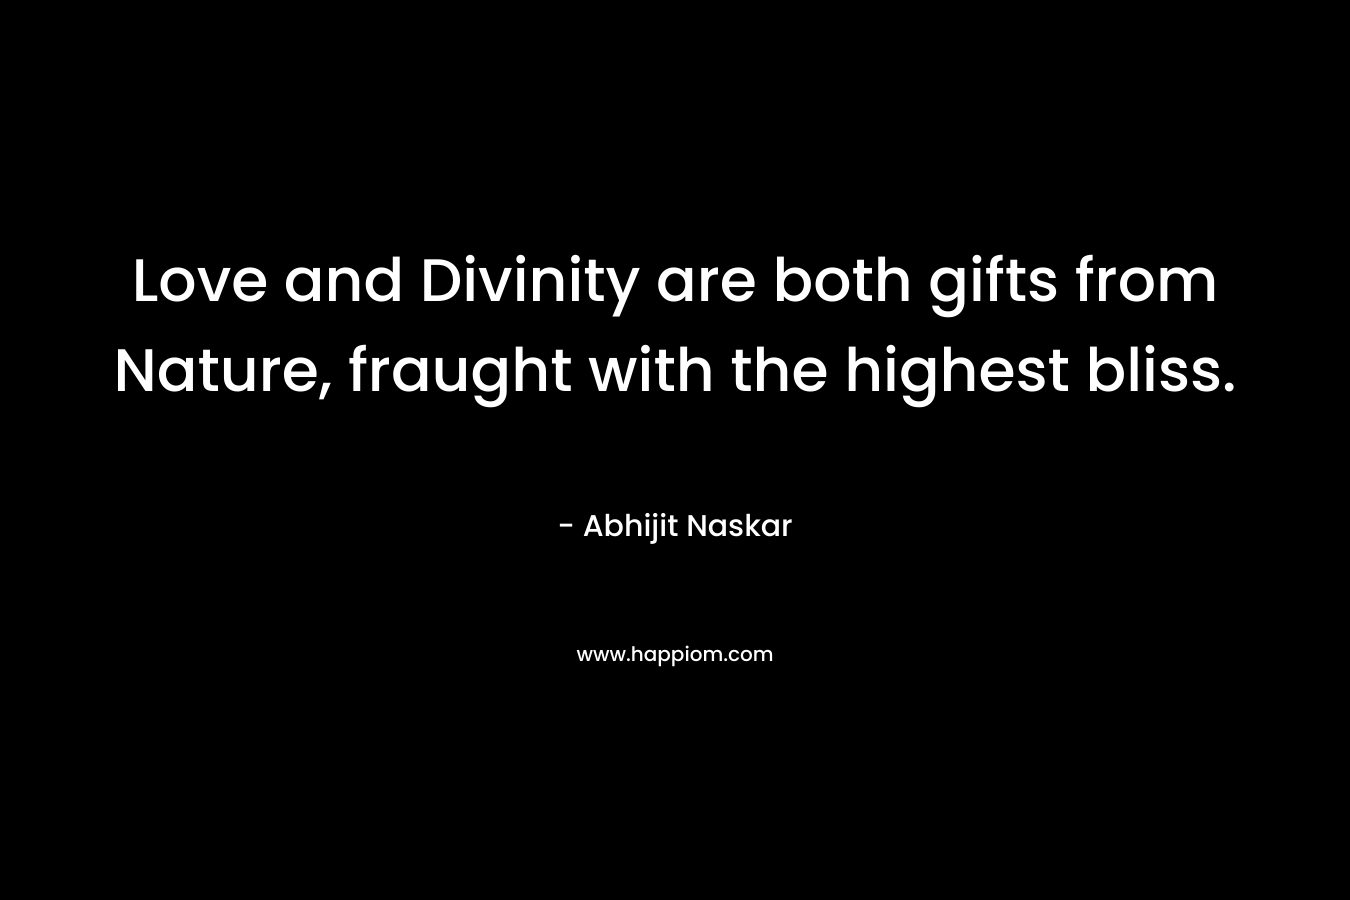 Love and Divinity are both gifts from Nature, fraught with the highest bliss. – Abhijit Naskar